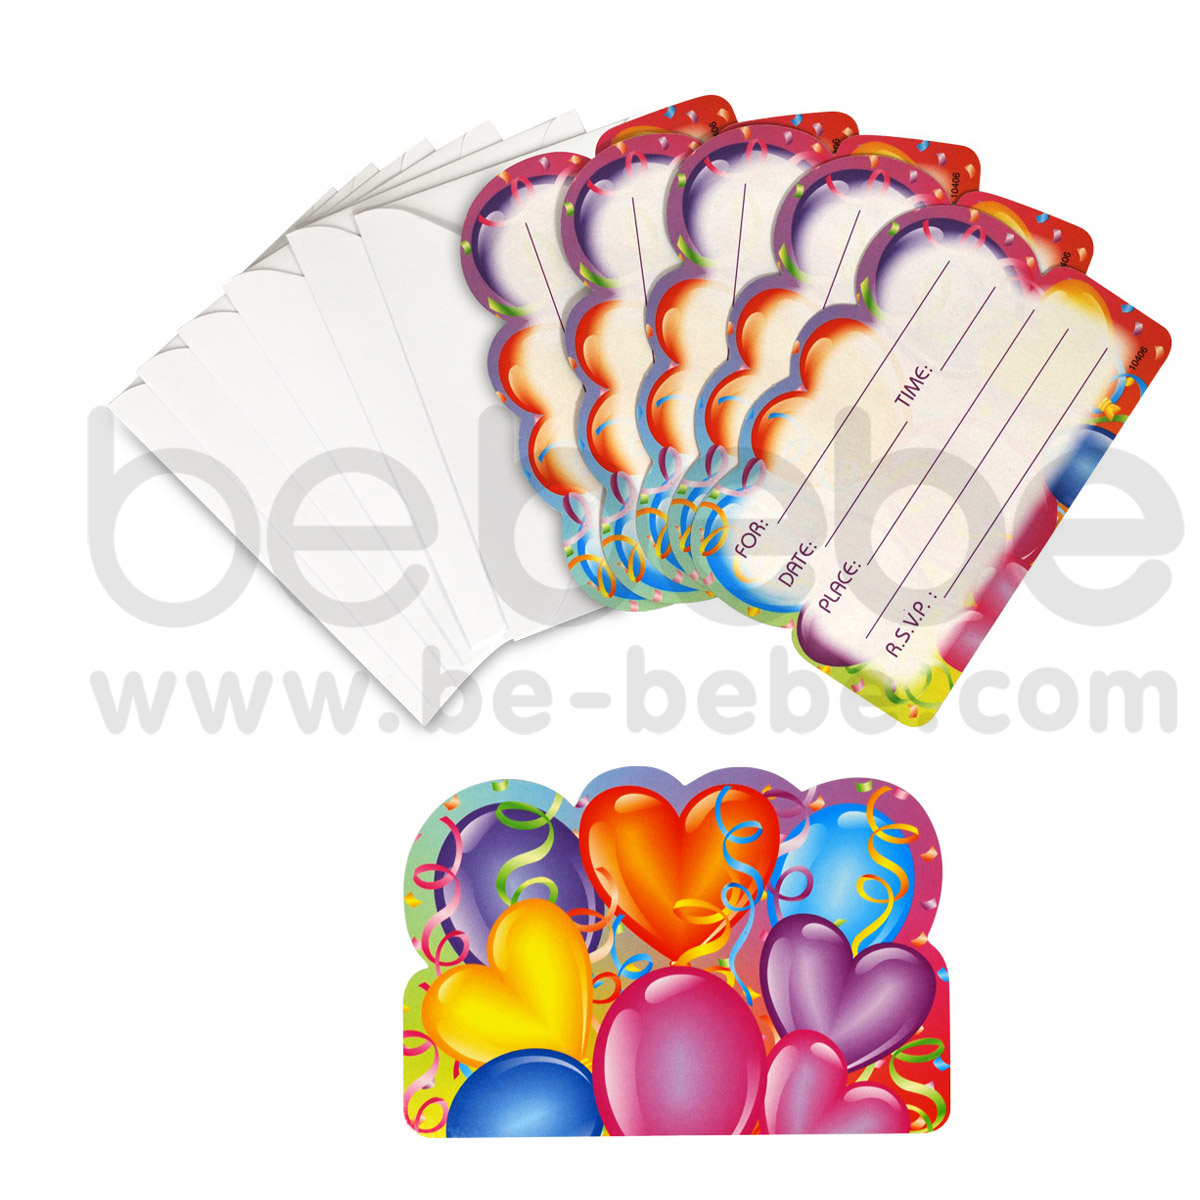 PARTY BUG : Invitation card 10x14 cm., 1 Pack